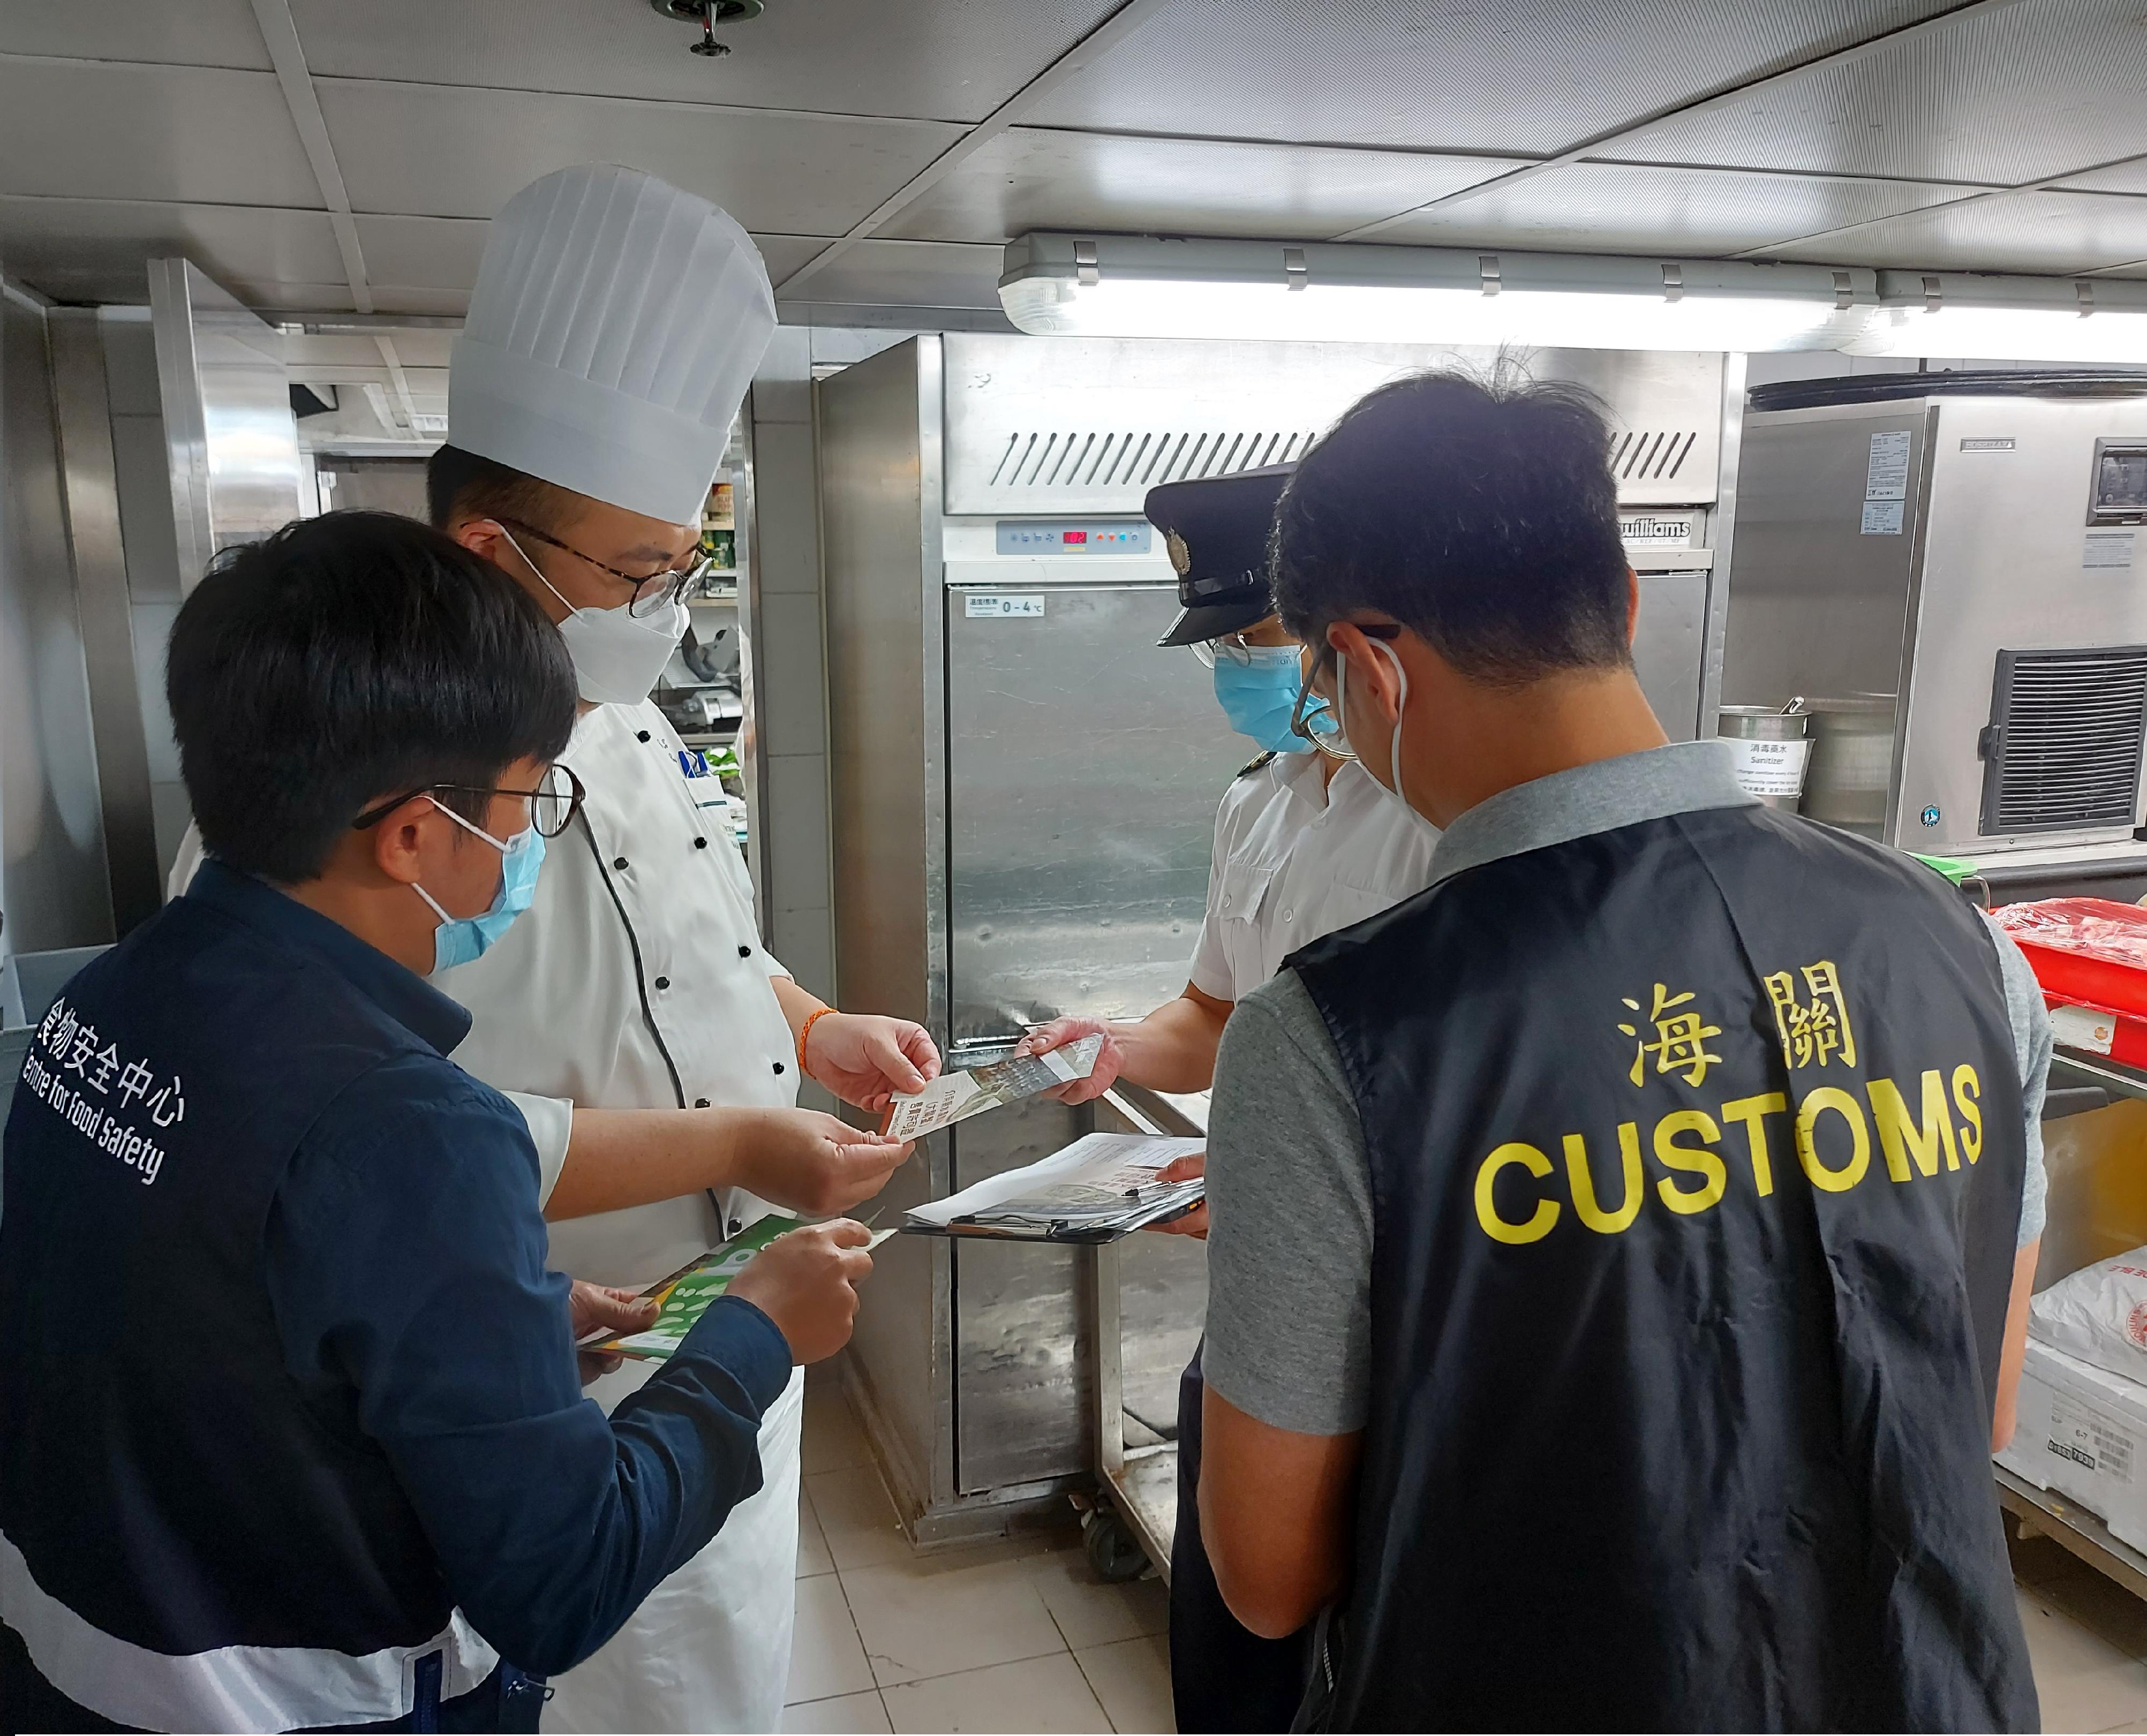 To safeguard food safety, the Food and Environmental Hygiene Department (FEHD) and Hong Kong Customs have launched a series of blitz operations from October 28 to inspect selling points of hairy crabs in various districts and combat the illegal sale of hairy crabs, with a view to ensuring that hairy crabs on sale in the market comply with relevant requirements under the laws. Photo shows officers of the FEHD and Customs distributing promotional leaflets to the operator of a food premises.